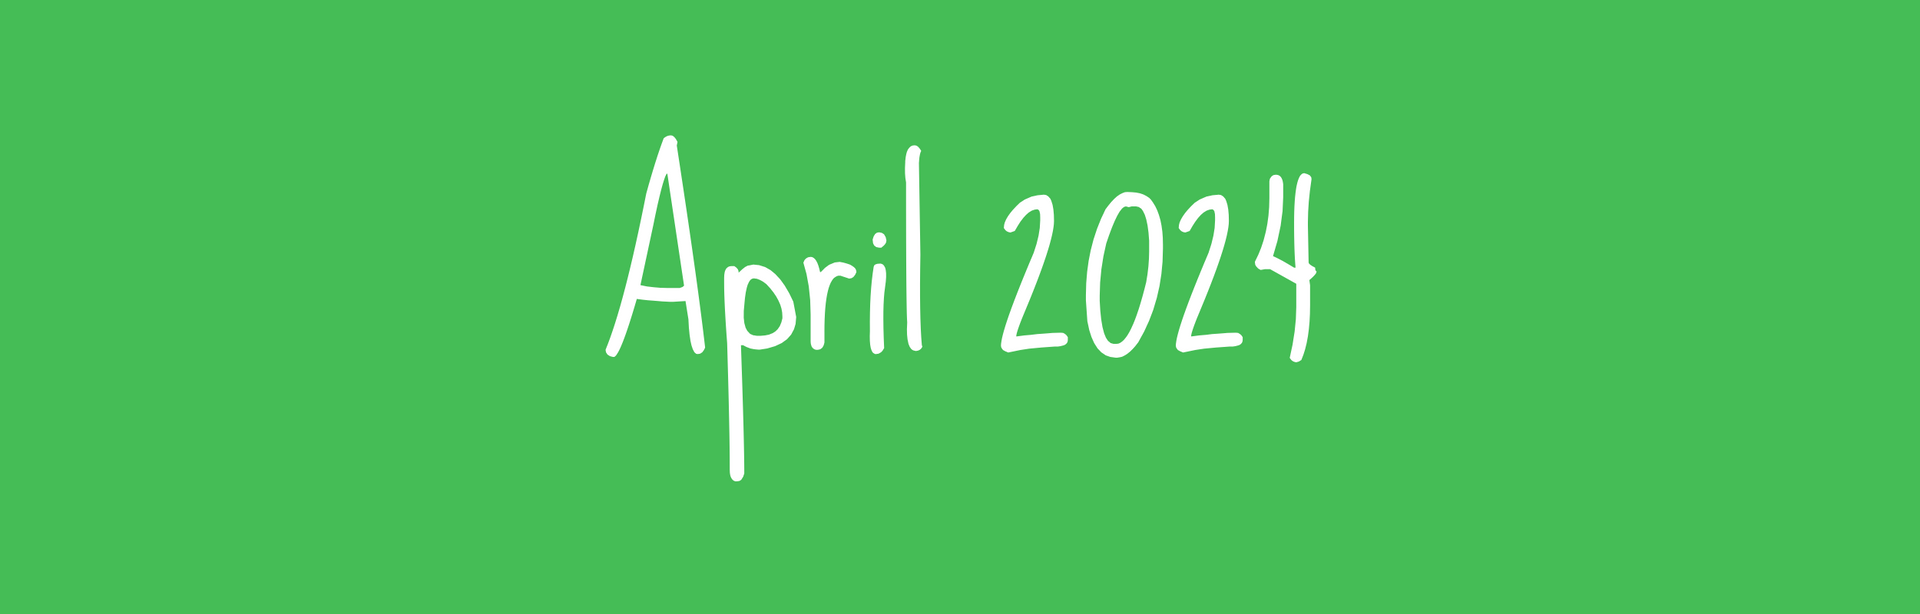 the word april is written in white on a green background .